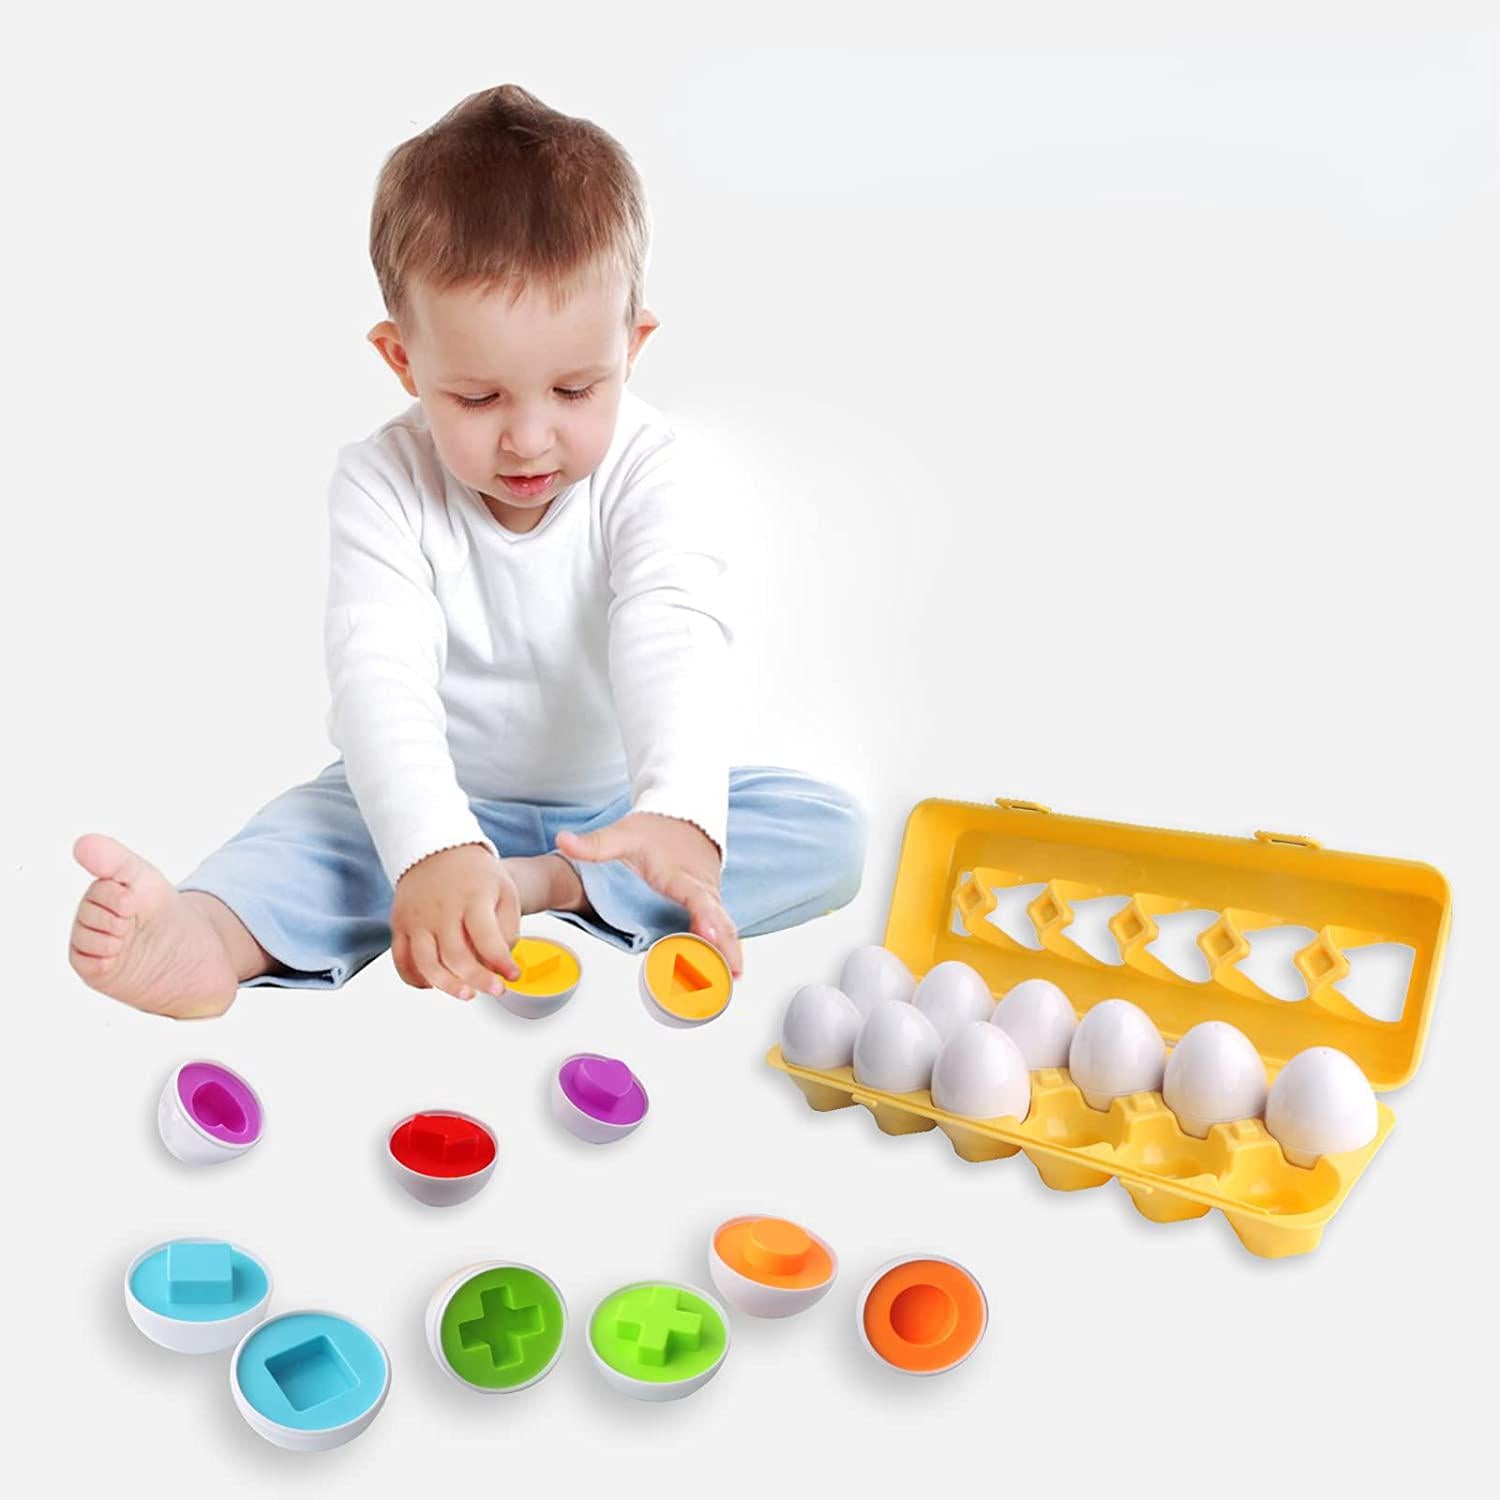 GIGIPIG, GIGIPIG Toddler Toys Matching Eggs Color and Shape Recoginition Sorter Puzzle, Fine Motor and Sensory Toys, Early Learning Educational Montessori Toy for Boys Girls 3 Years Old (12PCS)